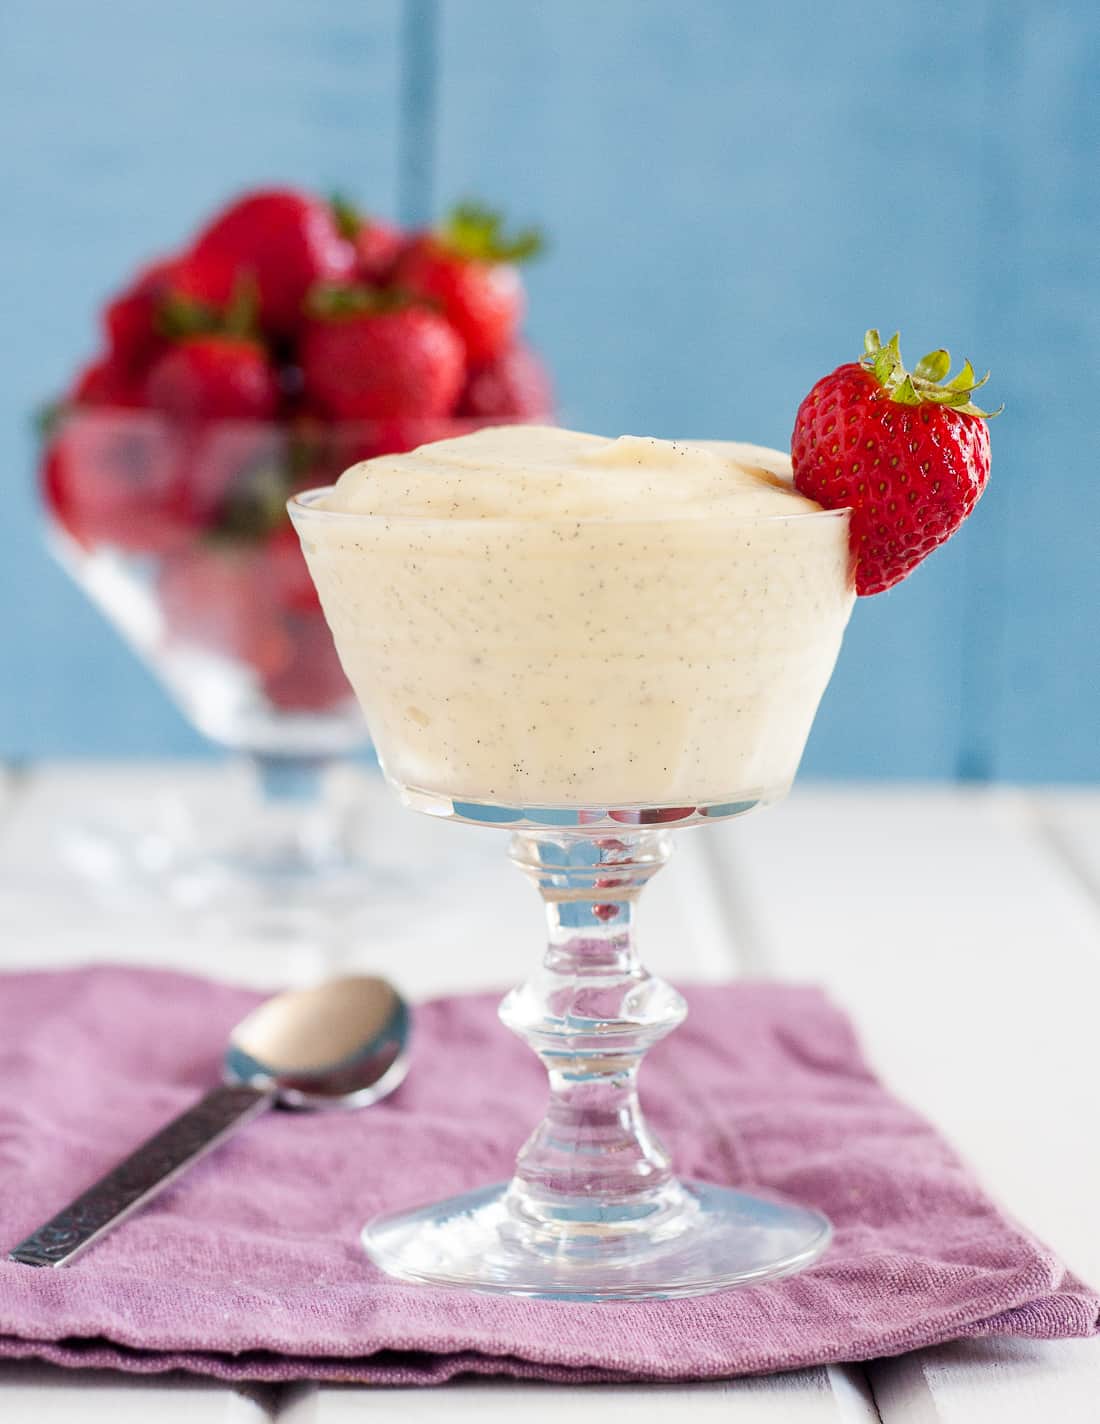 ﻿Vanilla bean pudding is a classic, beloved dessert you can whip up with just a few simple ingredients. * Recipe on GoodieGodmother.com